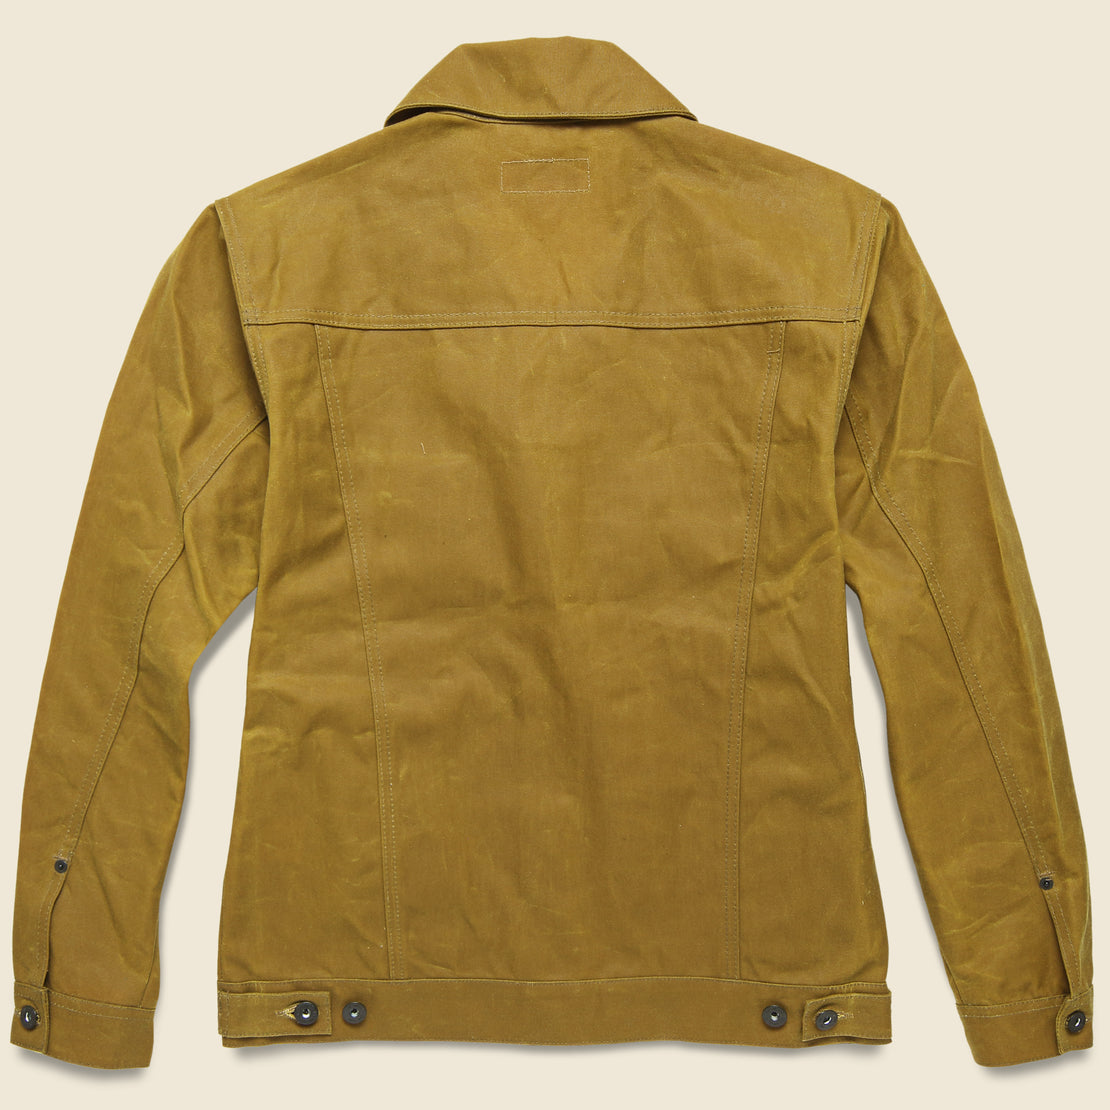 Waxed Short Cruiser Jacket - Tan - Filson - STAG Provisions - Outerwear - Coat / Jacket